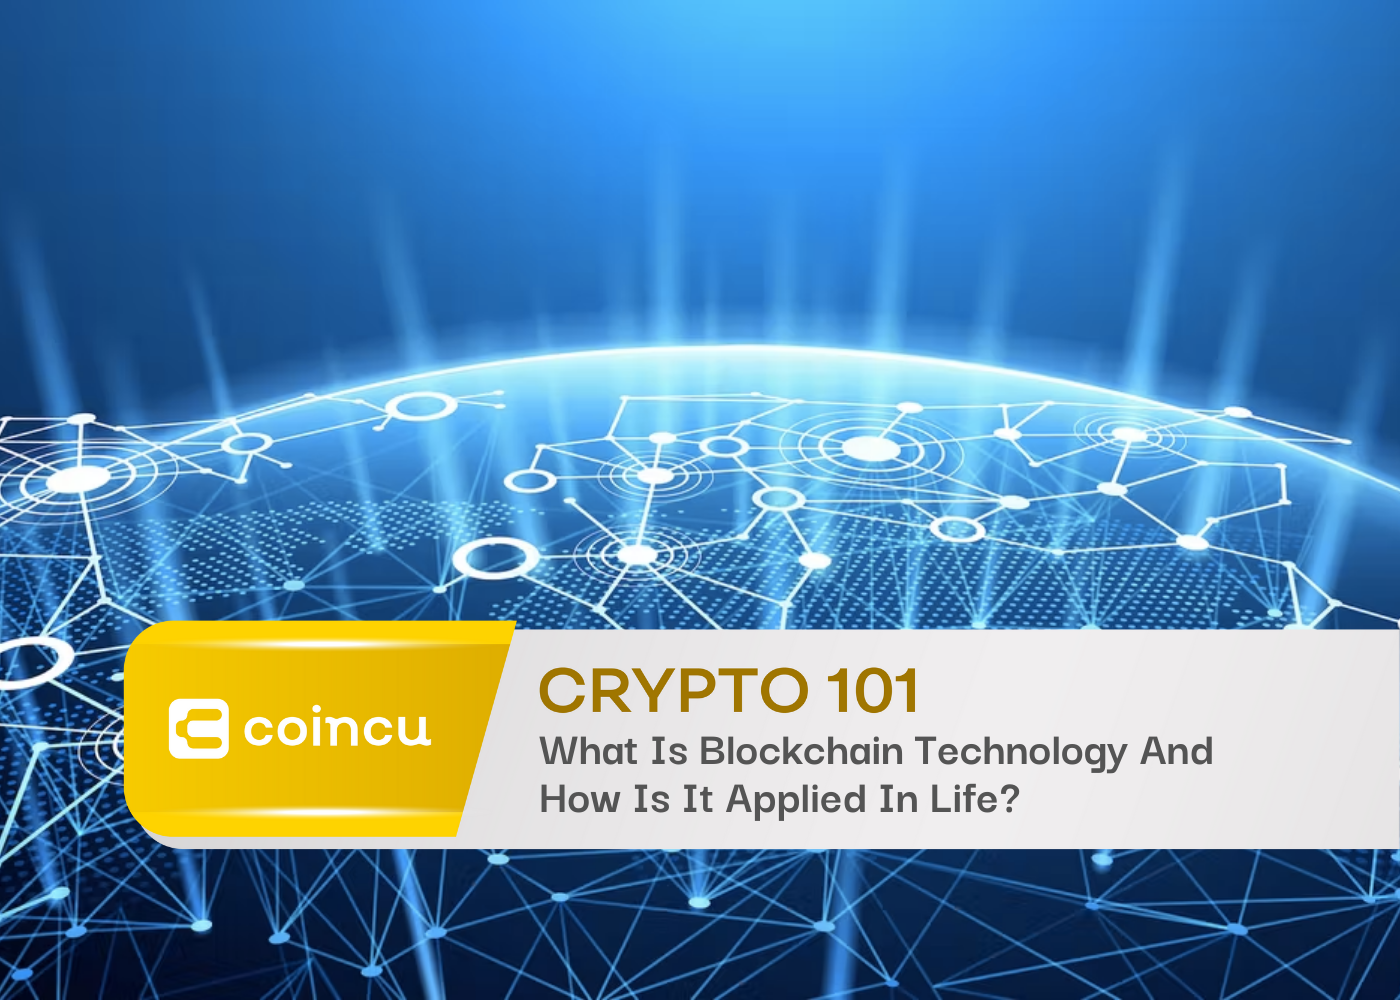 Crypto 101: What Is Blockchain Technology And How Is It Applied In Life?